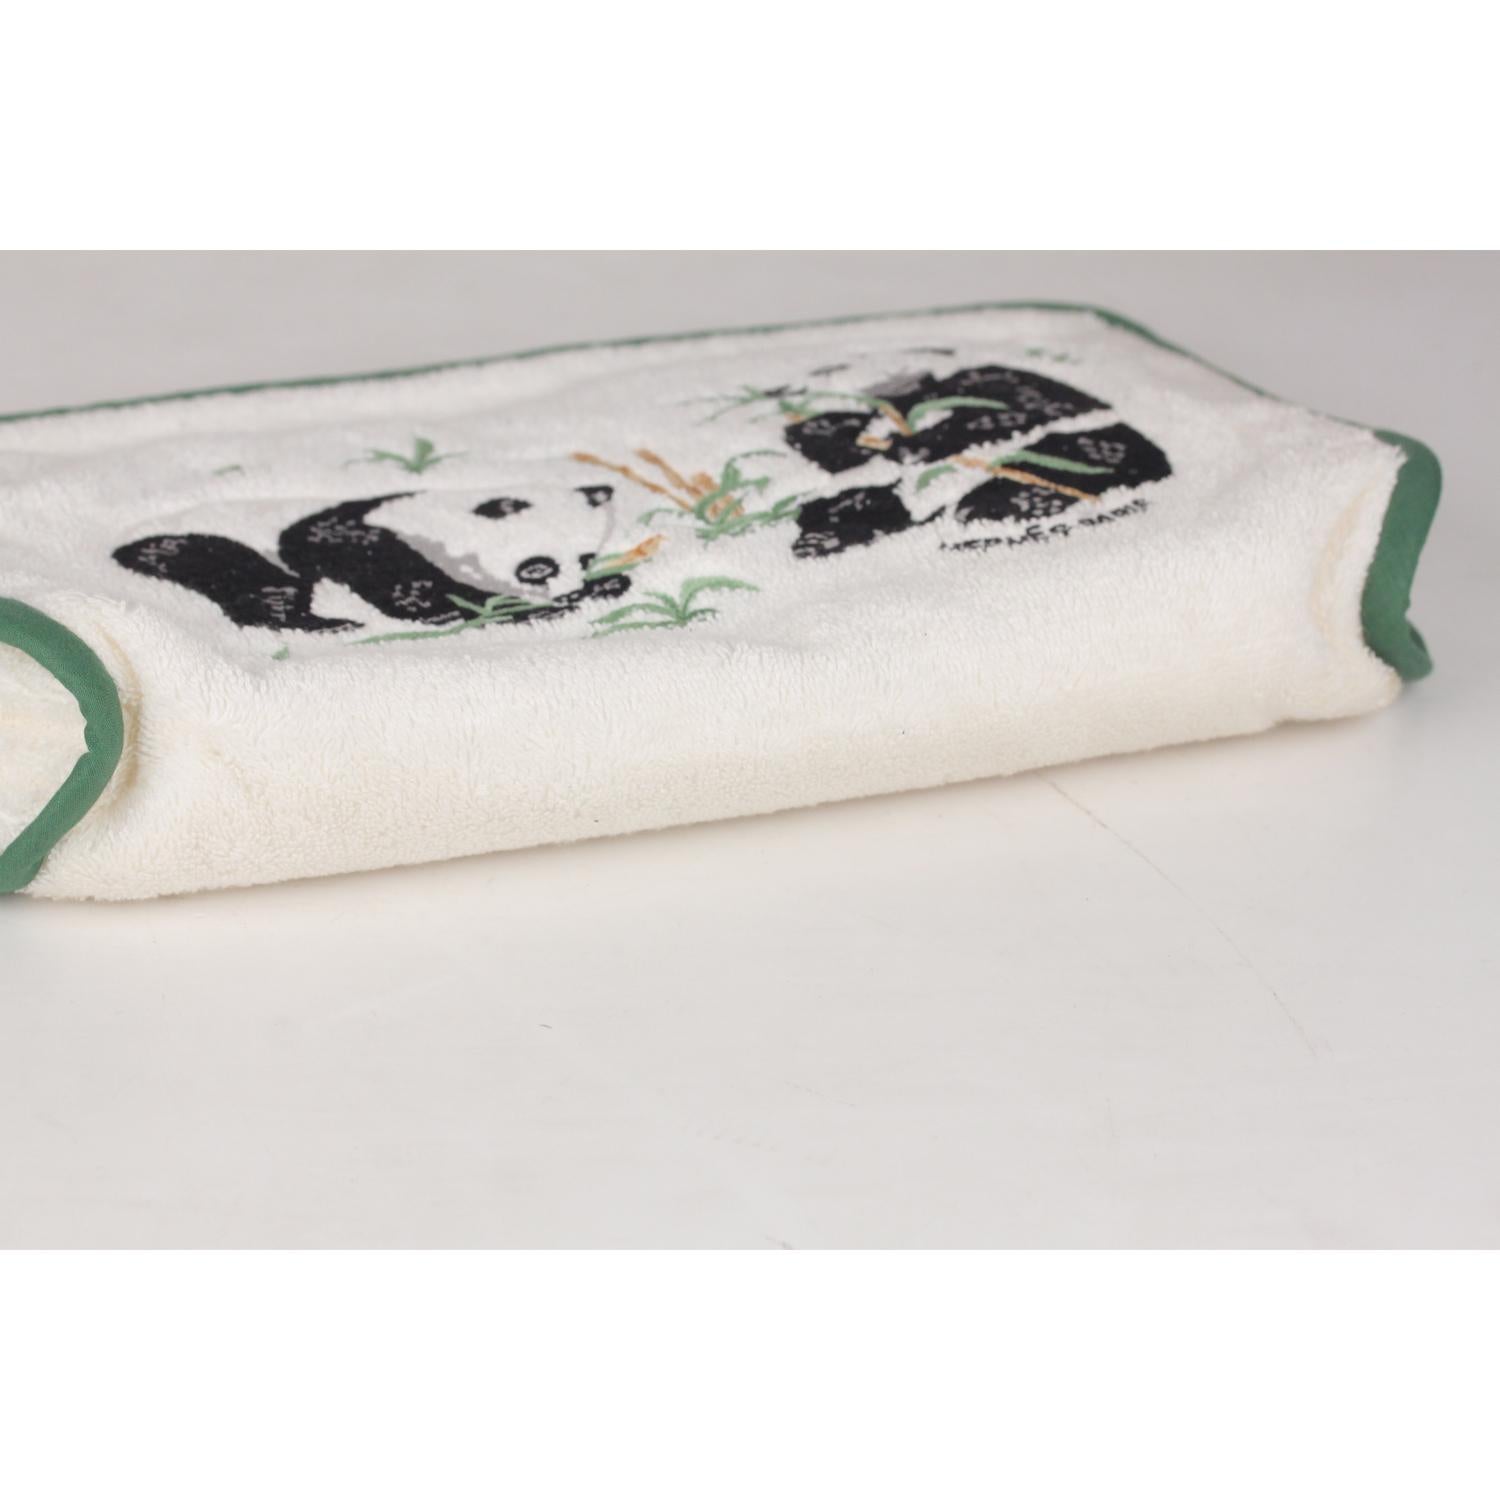 Hermes Paris White Terry Cloth Cotton Cosmetic Bag with Panda 1